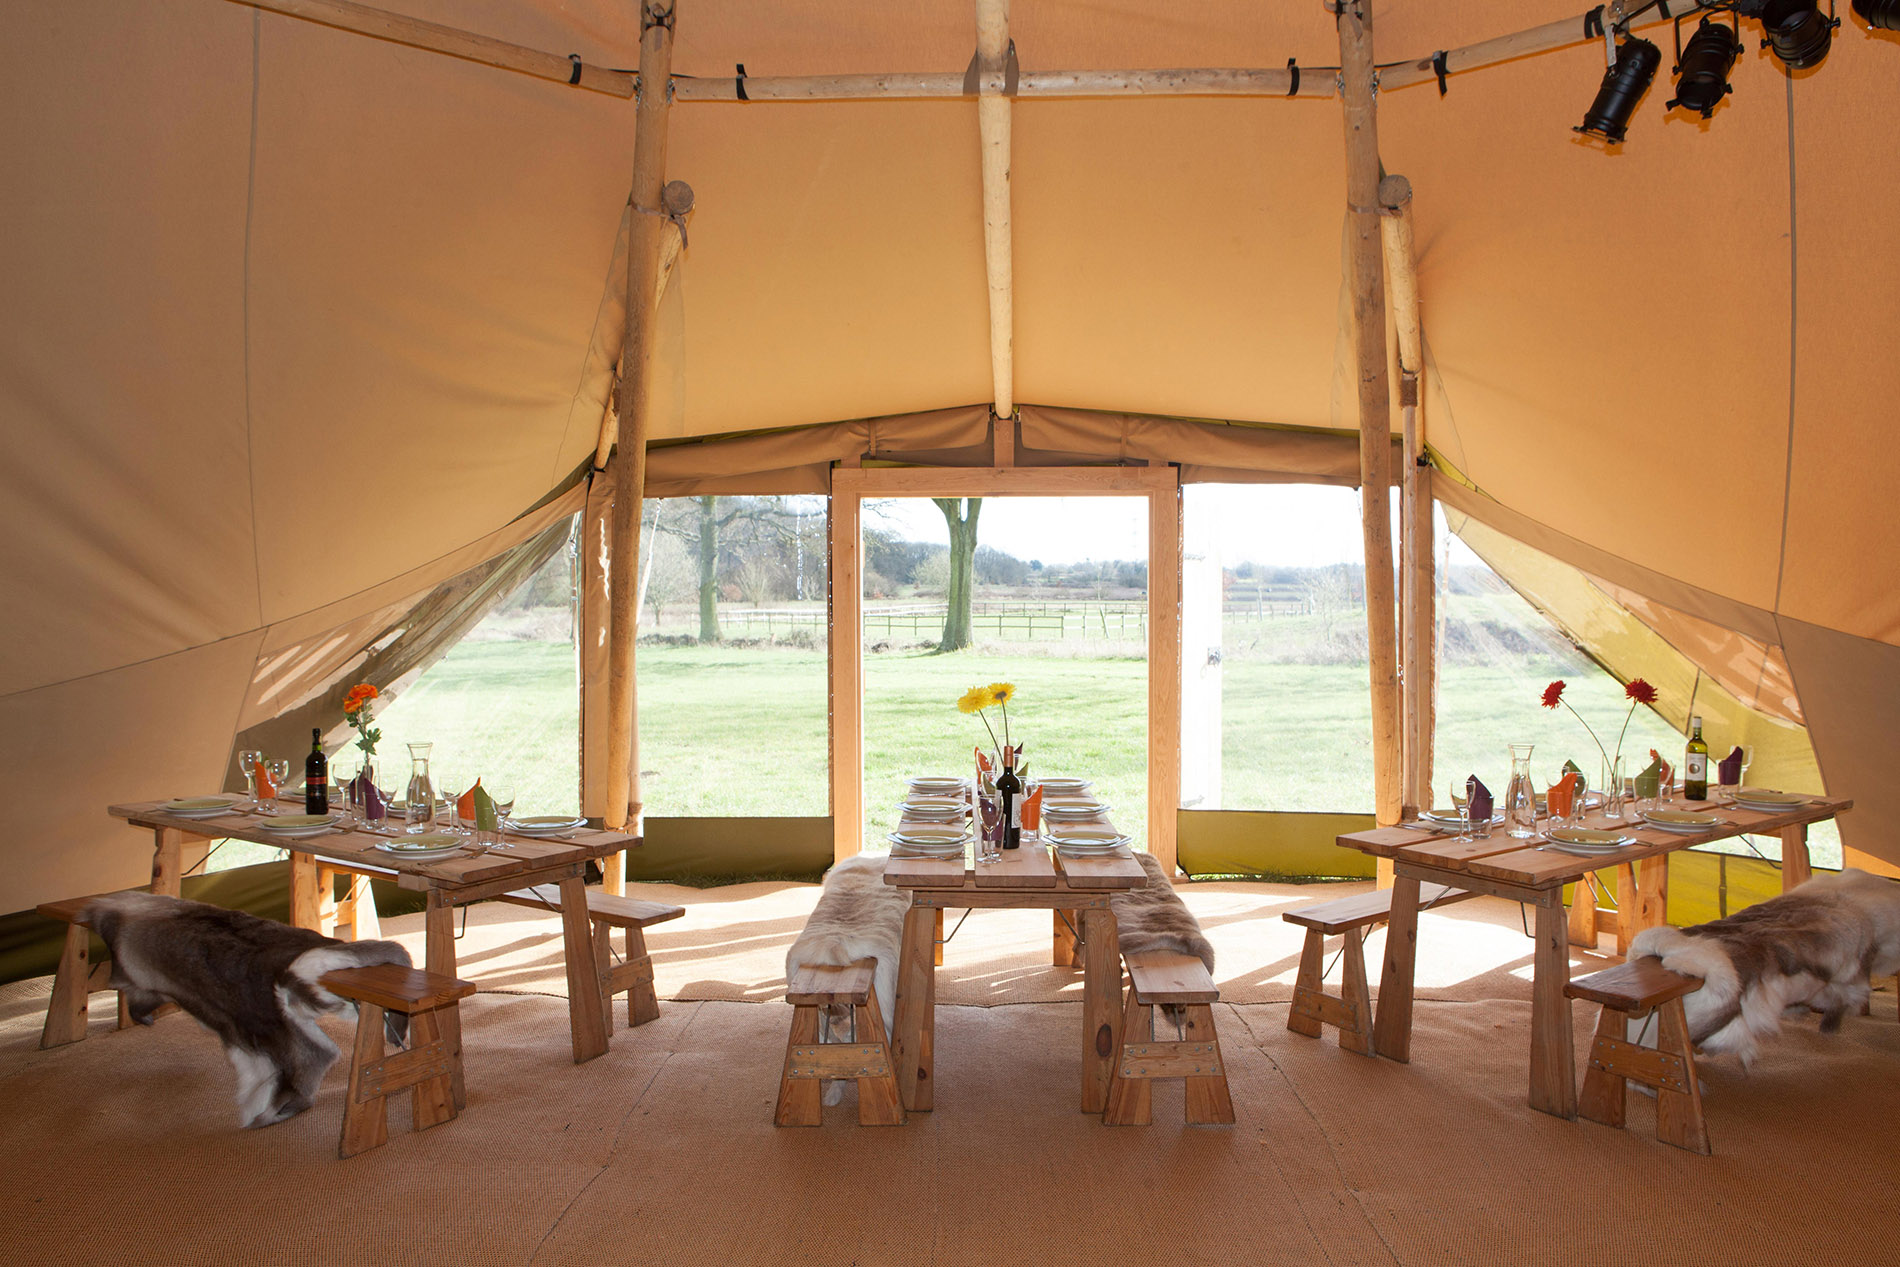 Tipi with benches and seat fur